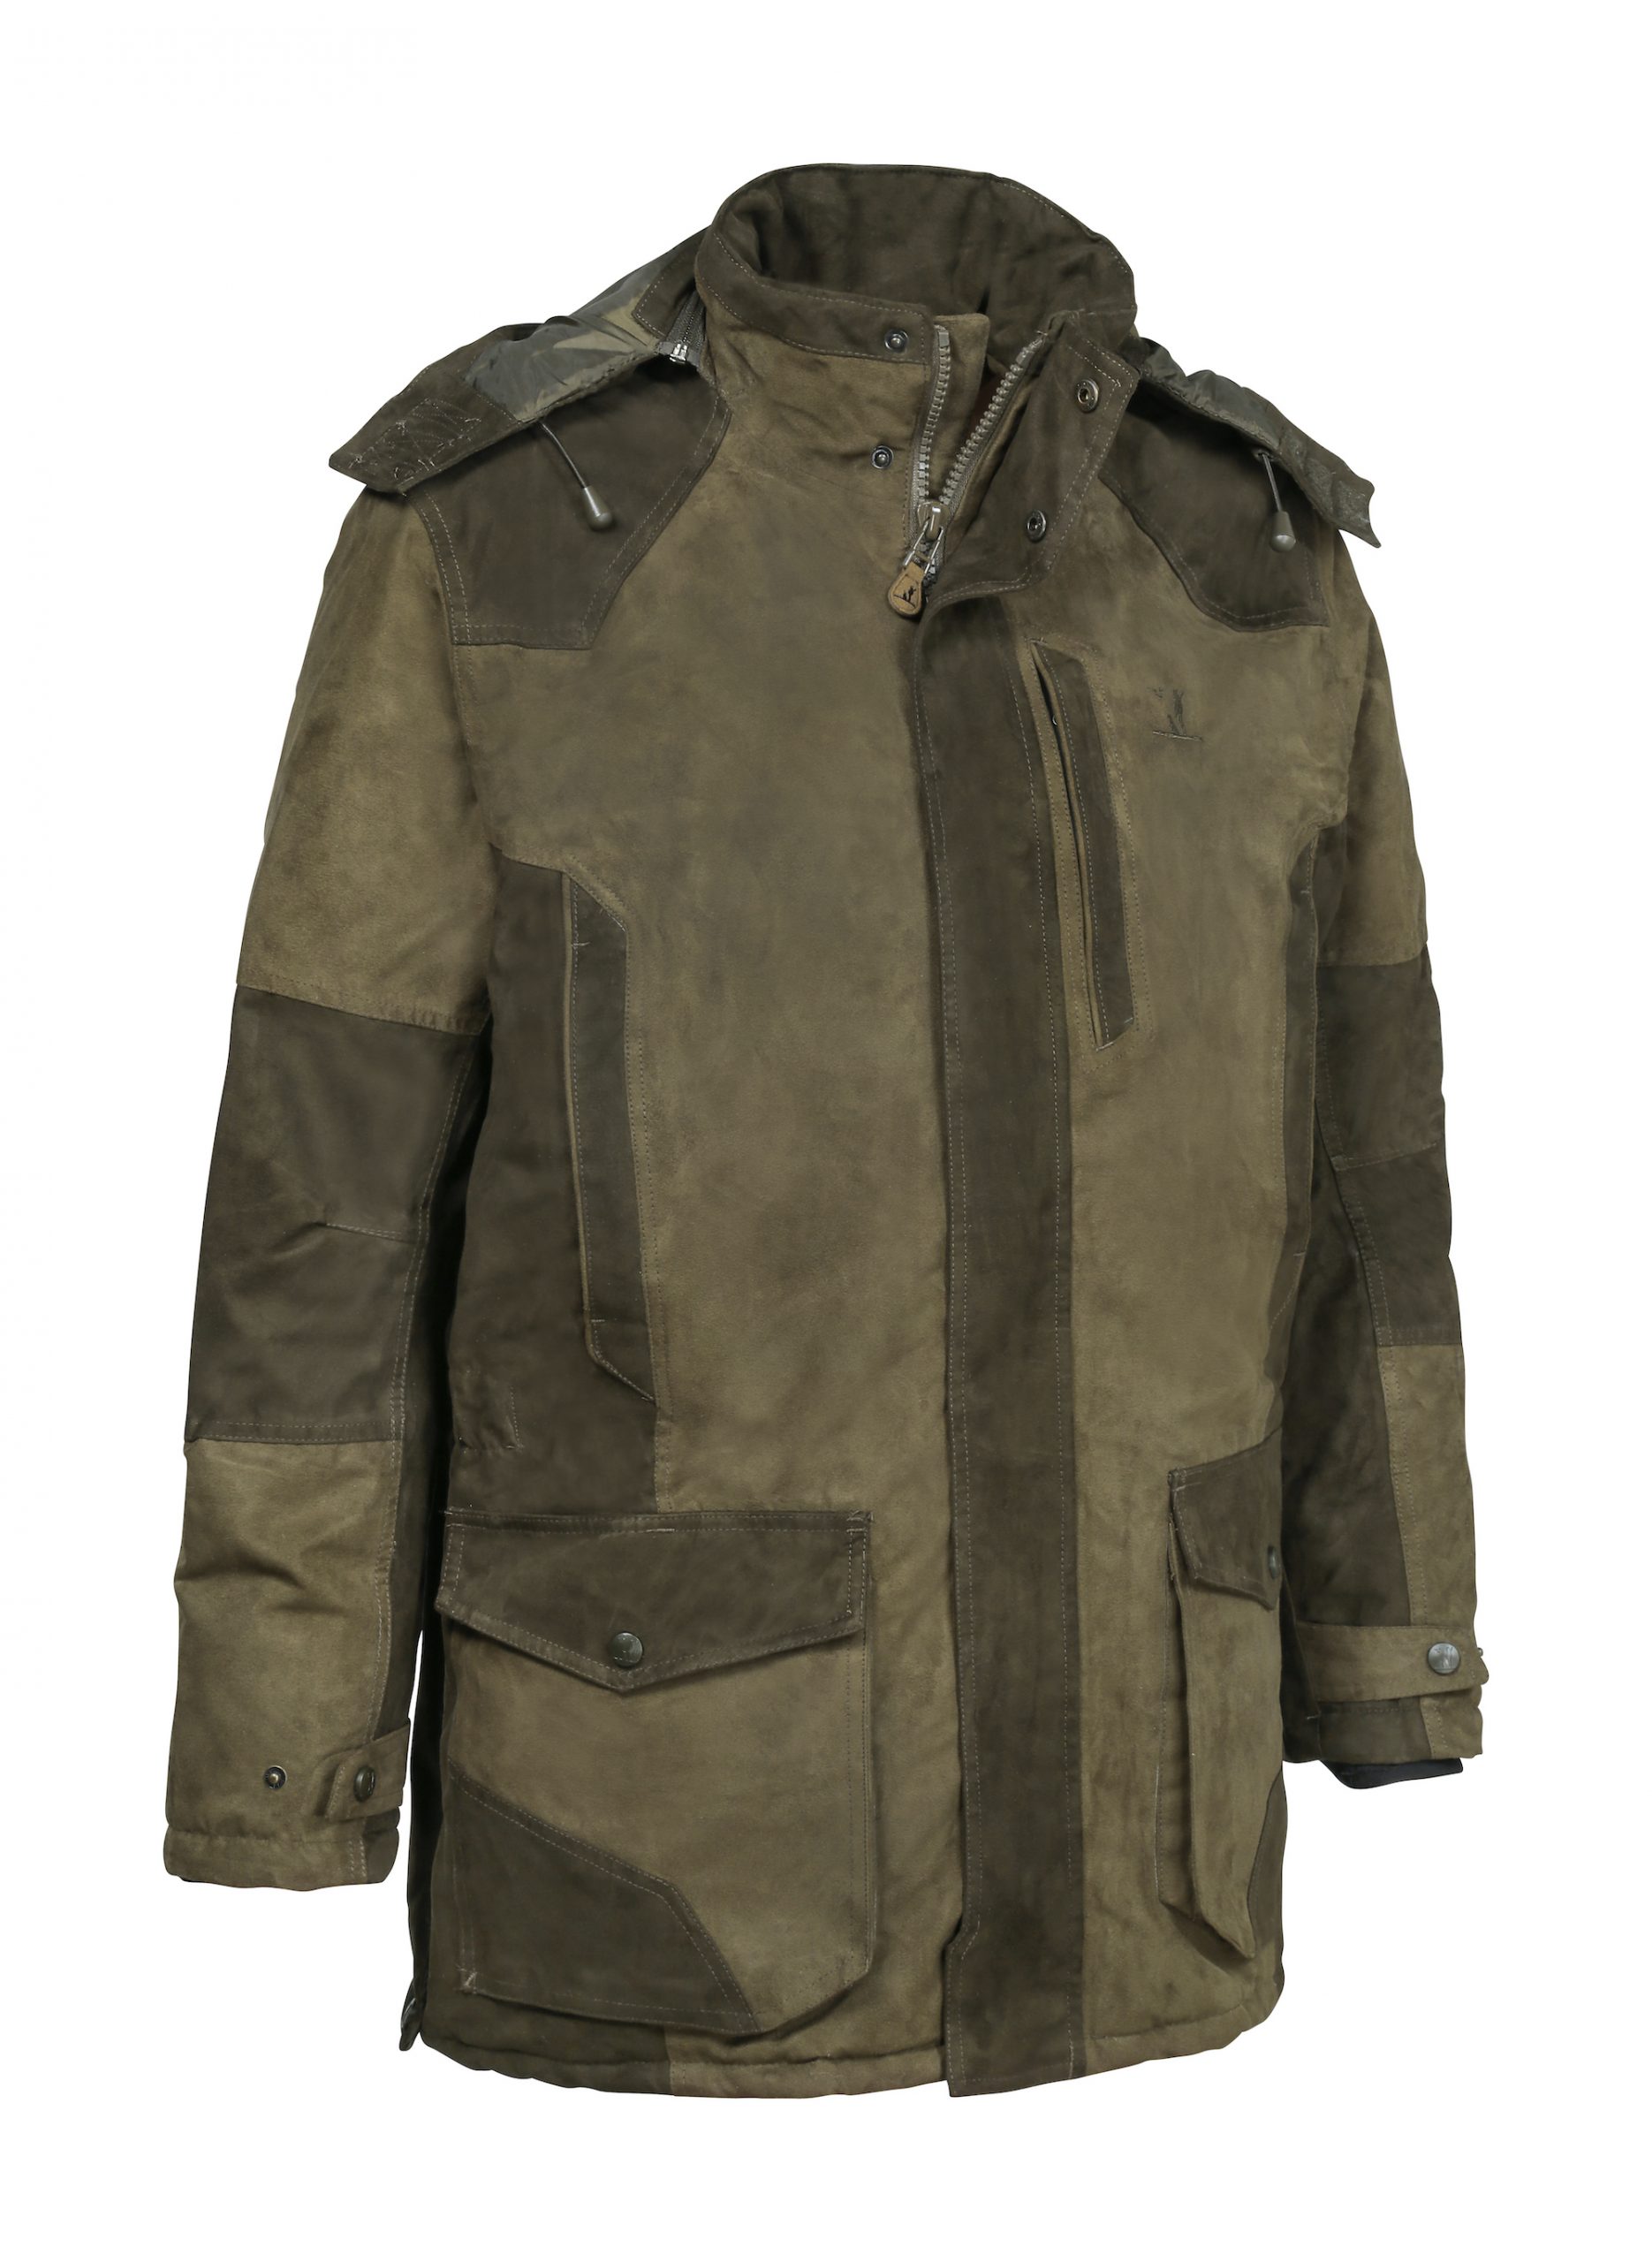 Percussion Grand-Nord Jacket - Shooting Jackets & Outdoor Clothing